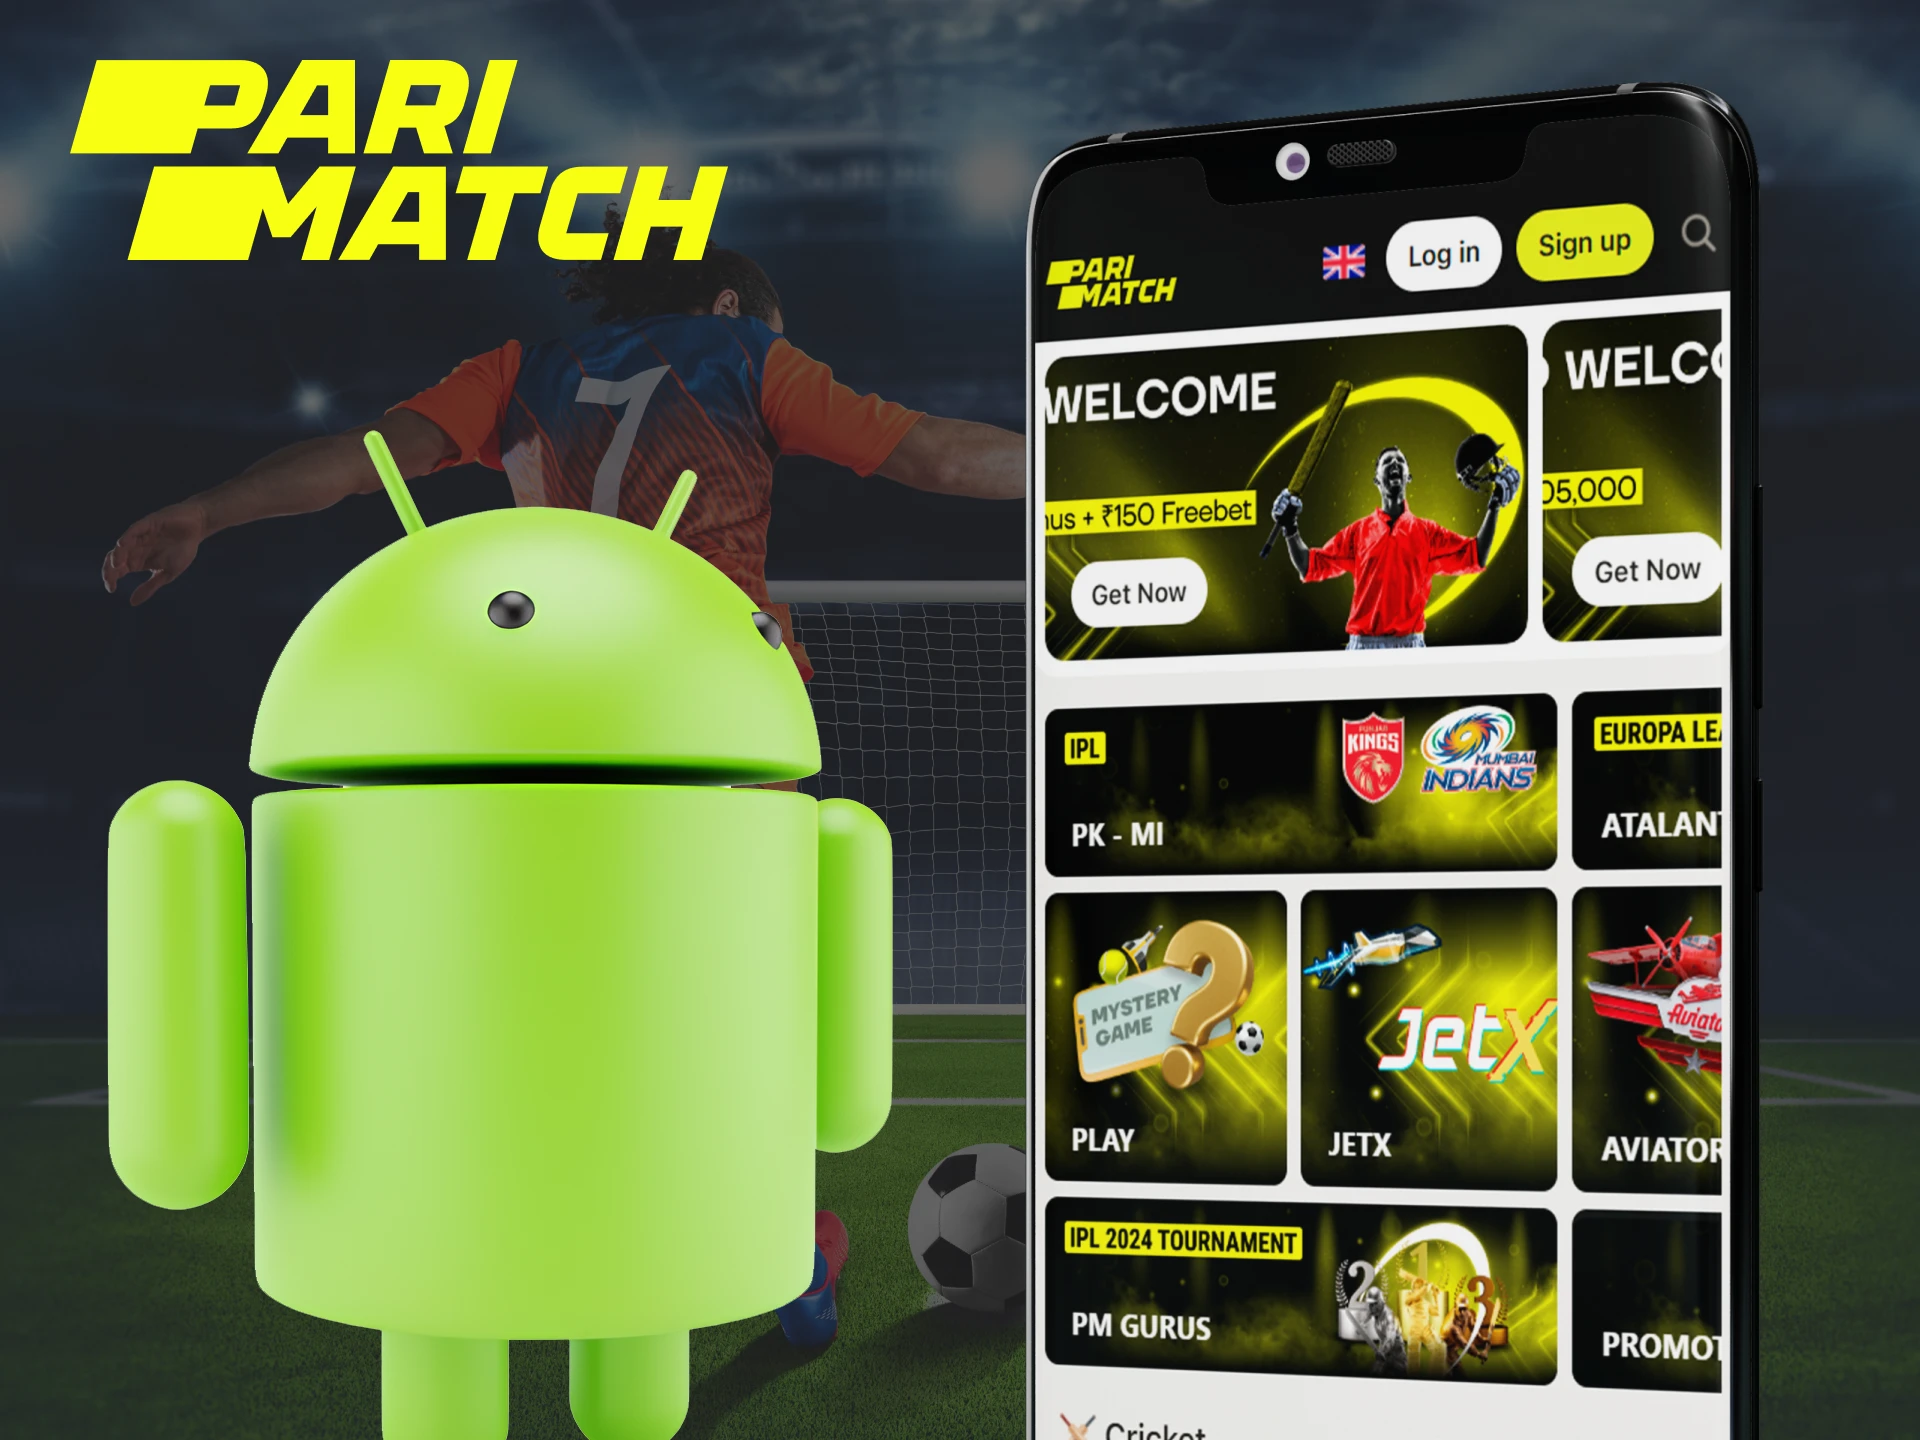 Parimatch has a convenient app for Android users.